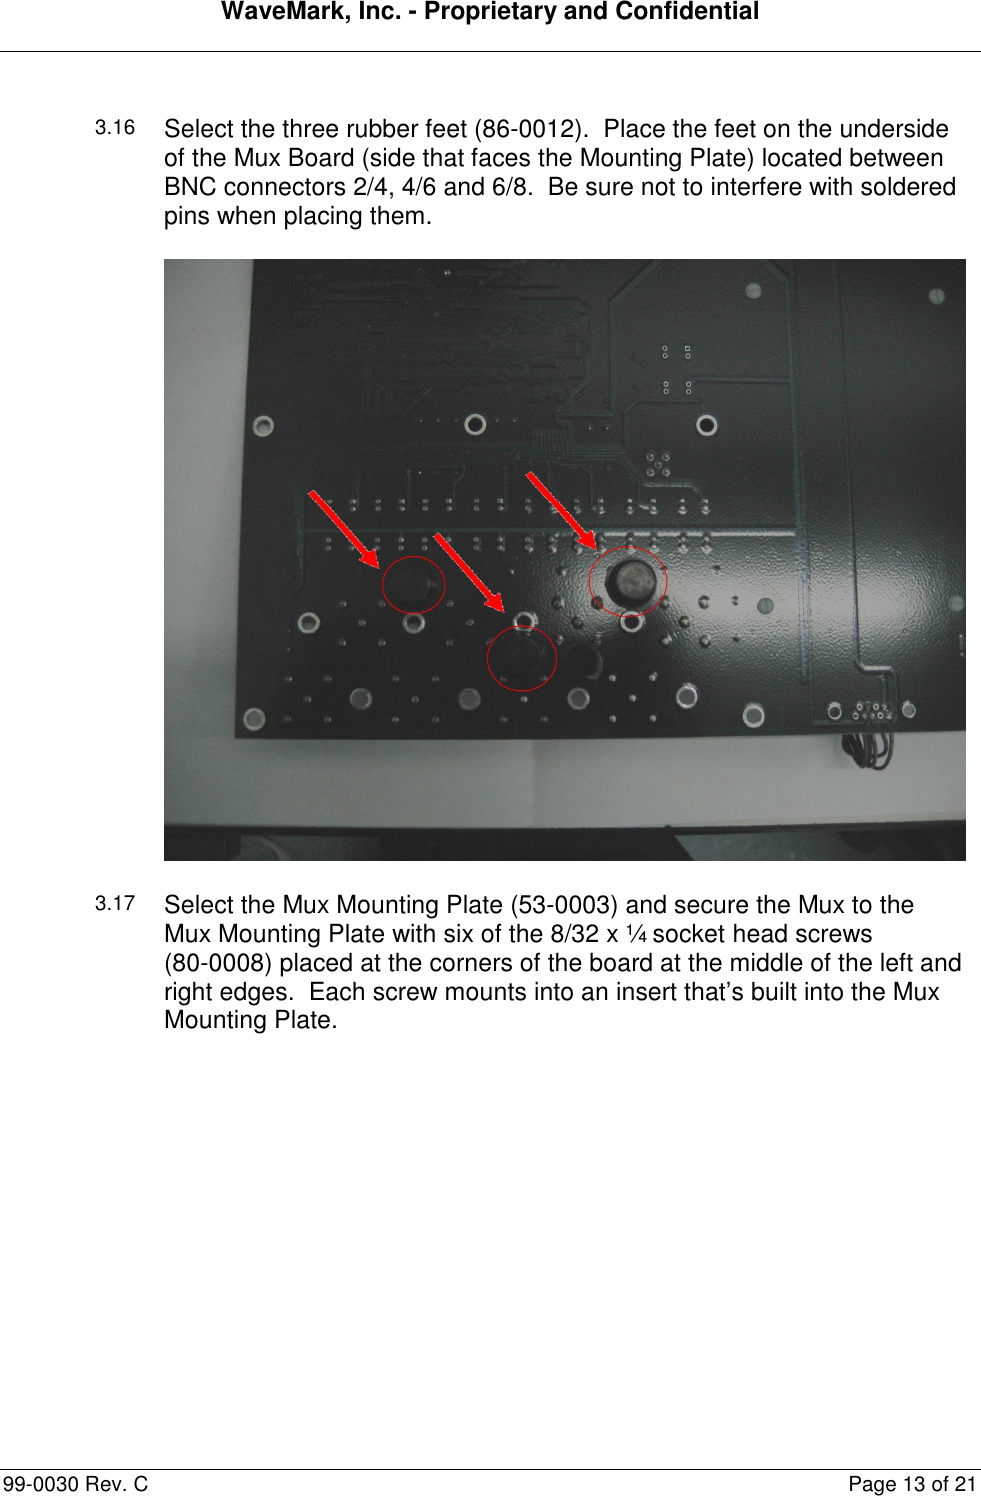 WaveMark, Inc. - Proprietary and Confidential  99-0030 Rev. C  Page 13 of 21  3.16 Select the three rubber feet (86-0012).  Place the feet on the underside of the Mux Board (side that faces the Mounting Plate) located between BNC connectors 2/4, 4/6 and 6/8.  Be sure not to interfere with soldered pins when placing them.  3.17 Select the Mux Mounting Plate (53-0003) and secure the Mux to the Mux Mounting Plate with six of the 8/32 x ¼ socket head screws  (80-0008) placed at the corners of the board at the middle of the left and right edges.  Each screw mounts into an insert that’s built into the Mux Mounting Plate. 